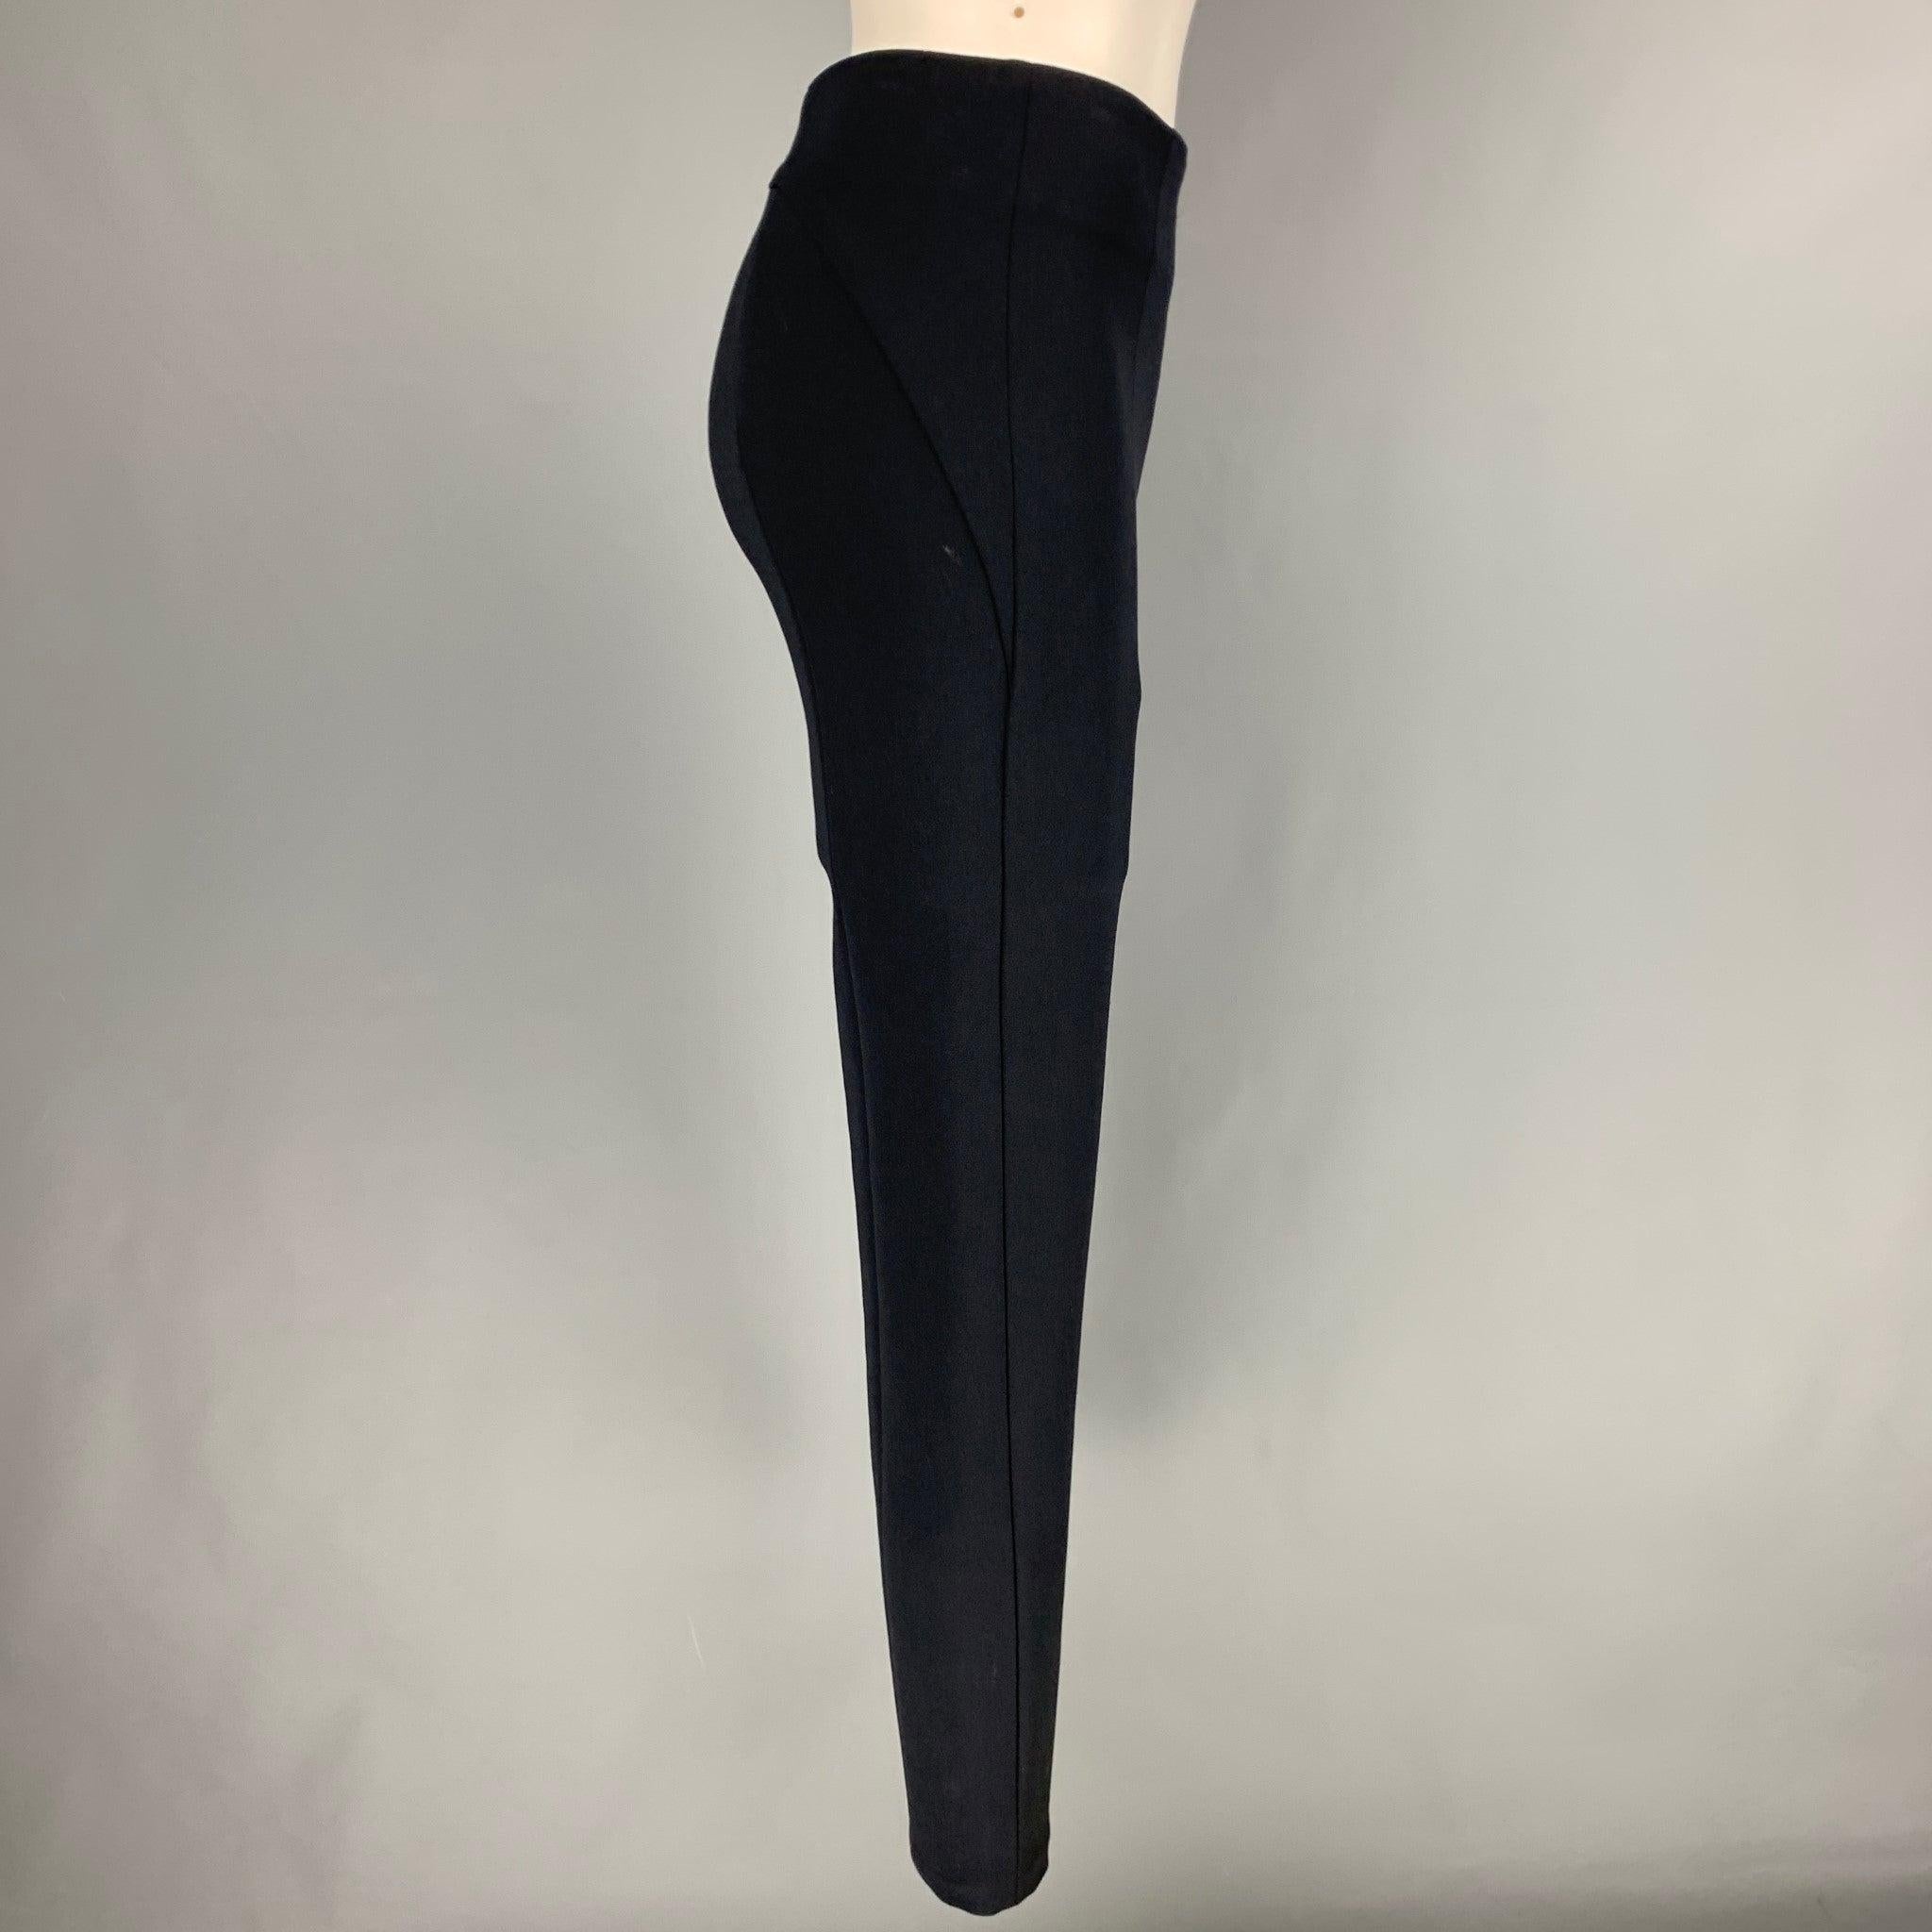 PRADA dress pants
in a navy nylon blend fabric featuring a narrow leg style, ankle zips, and side zipper closure.Very Good Pre-Owned Condition. Minor signs of wear. 

Marked:   38 

Measurements: 
  Waist: 27 inches Rise: 11 inches Inseam: 29 inches